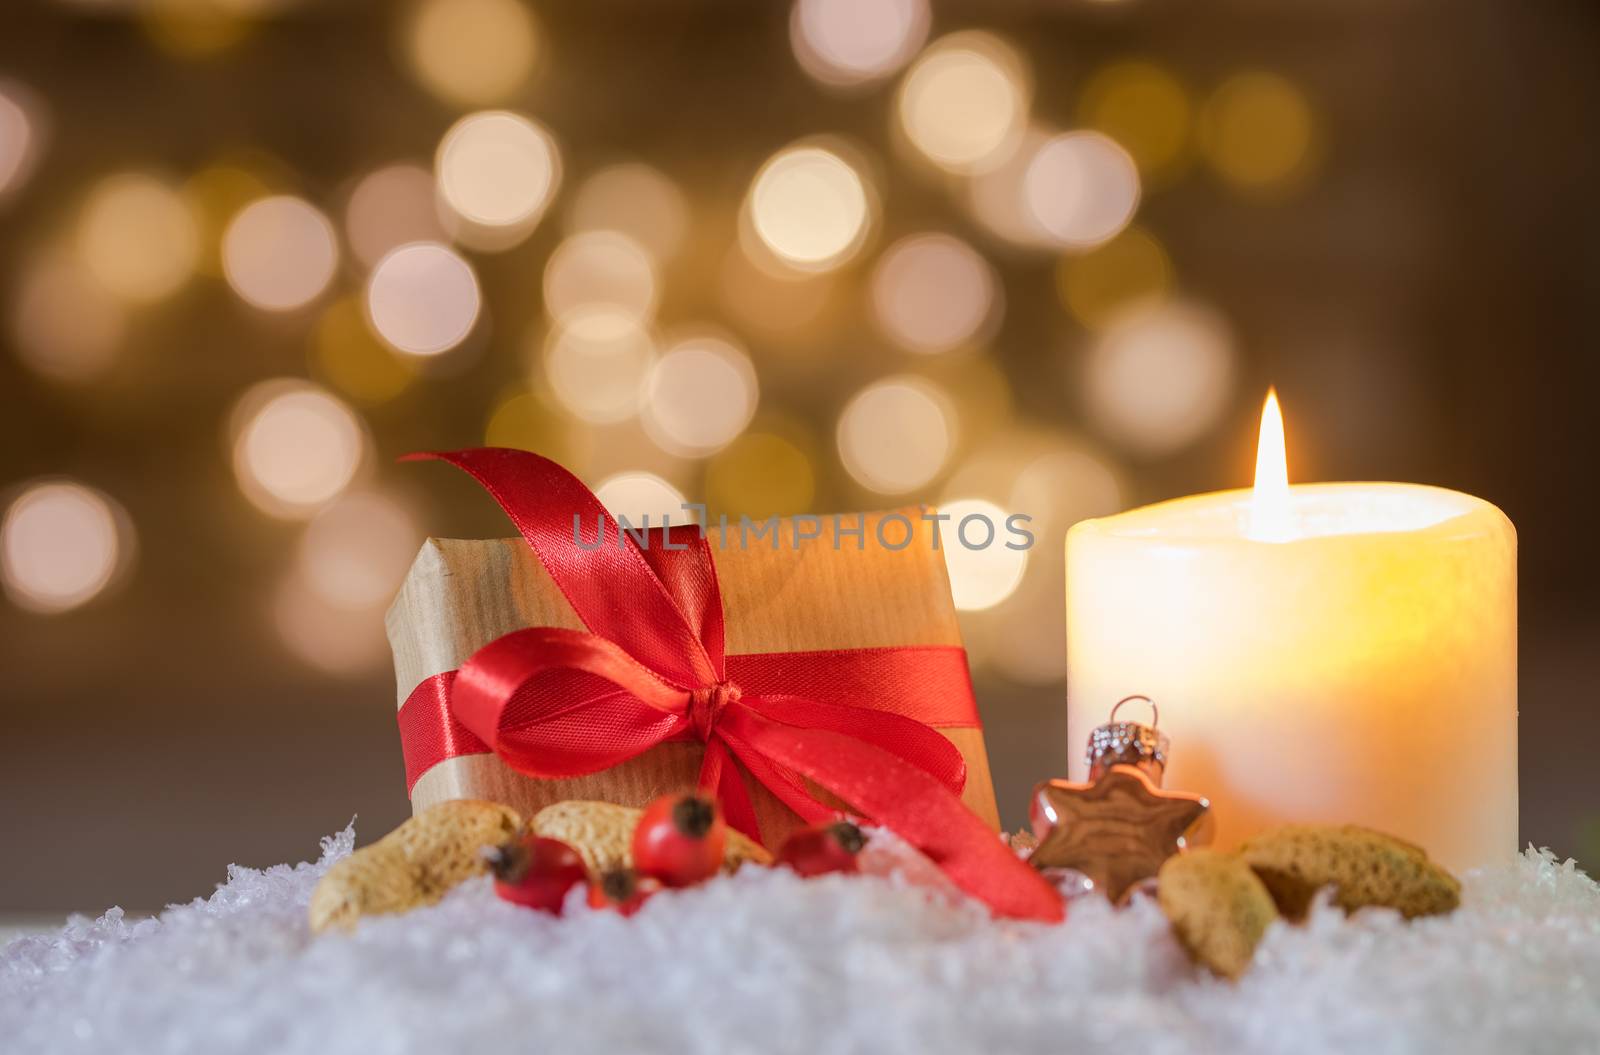 Advent and Christmas present with candlelight on snow 